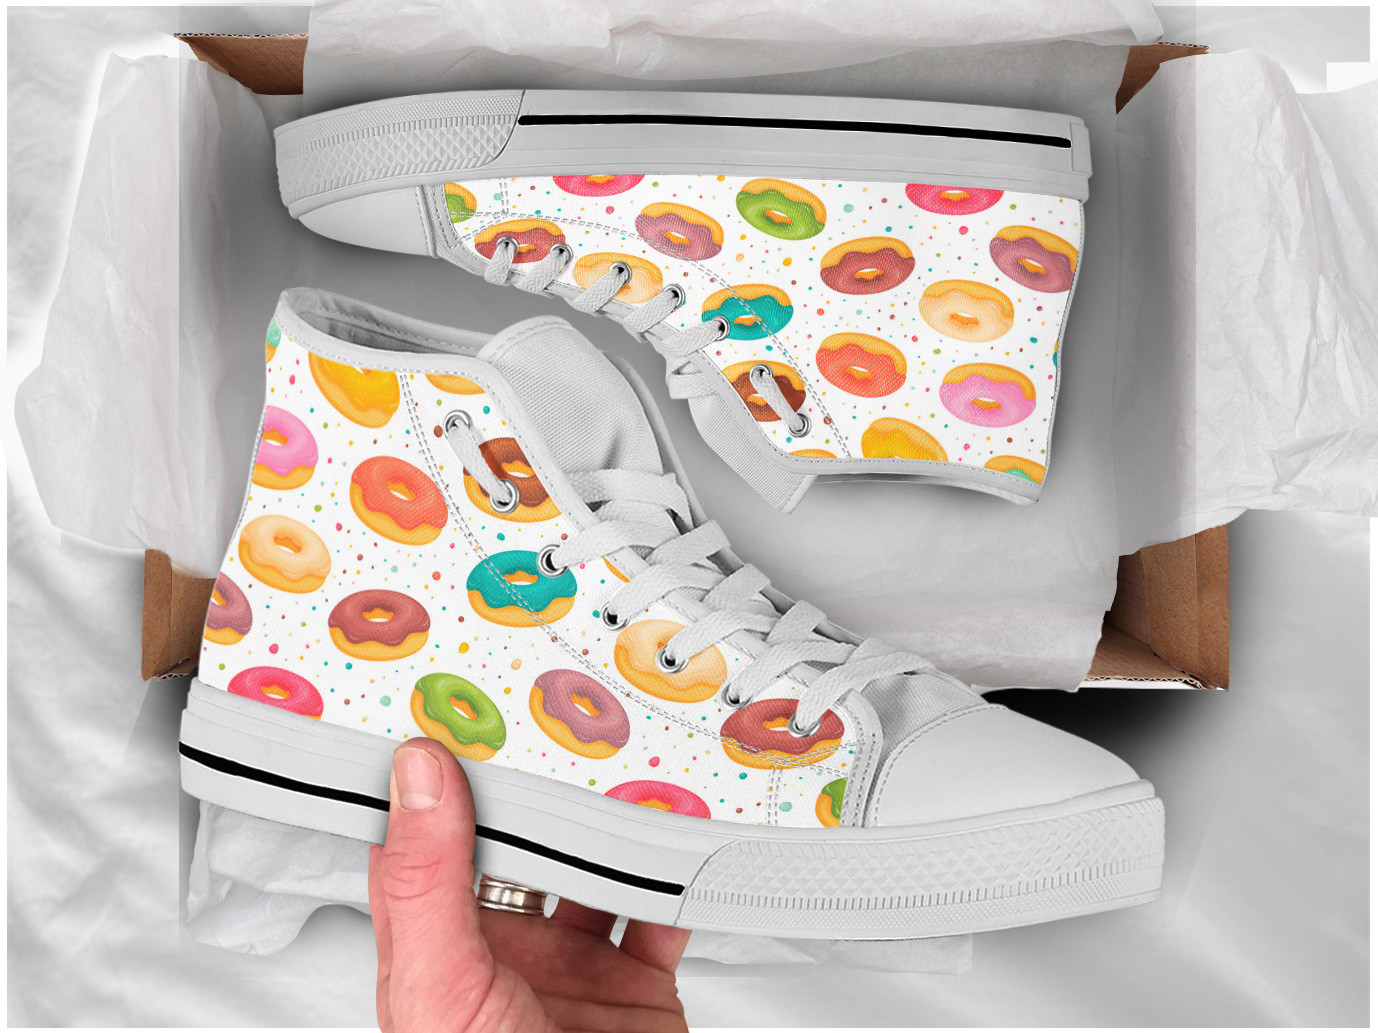 Kawaii Donuts Shoes | Custom High Top Sneakers For Kids & Adults